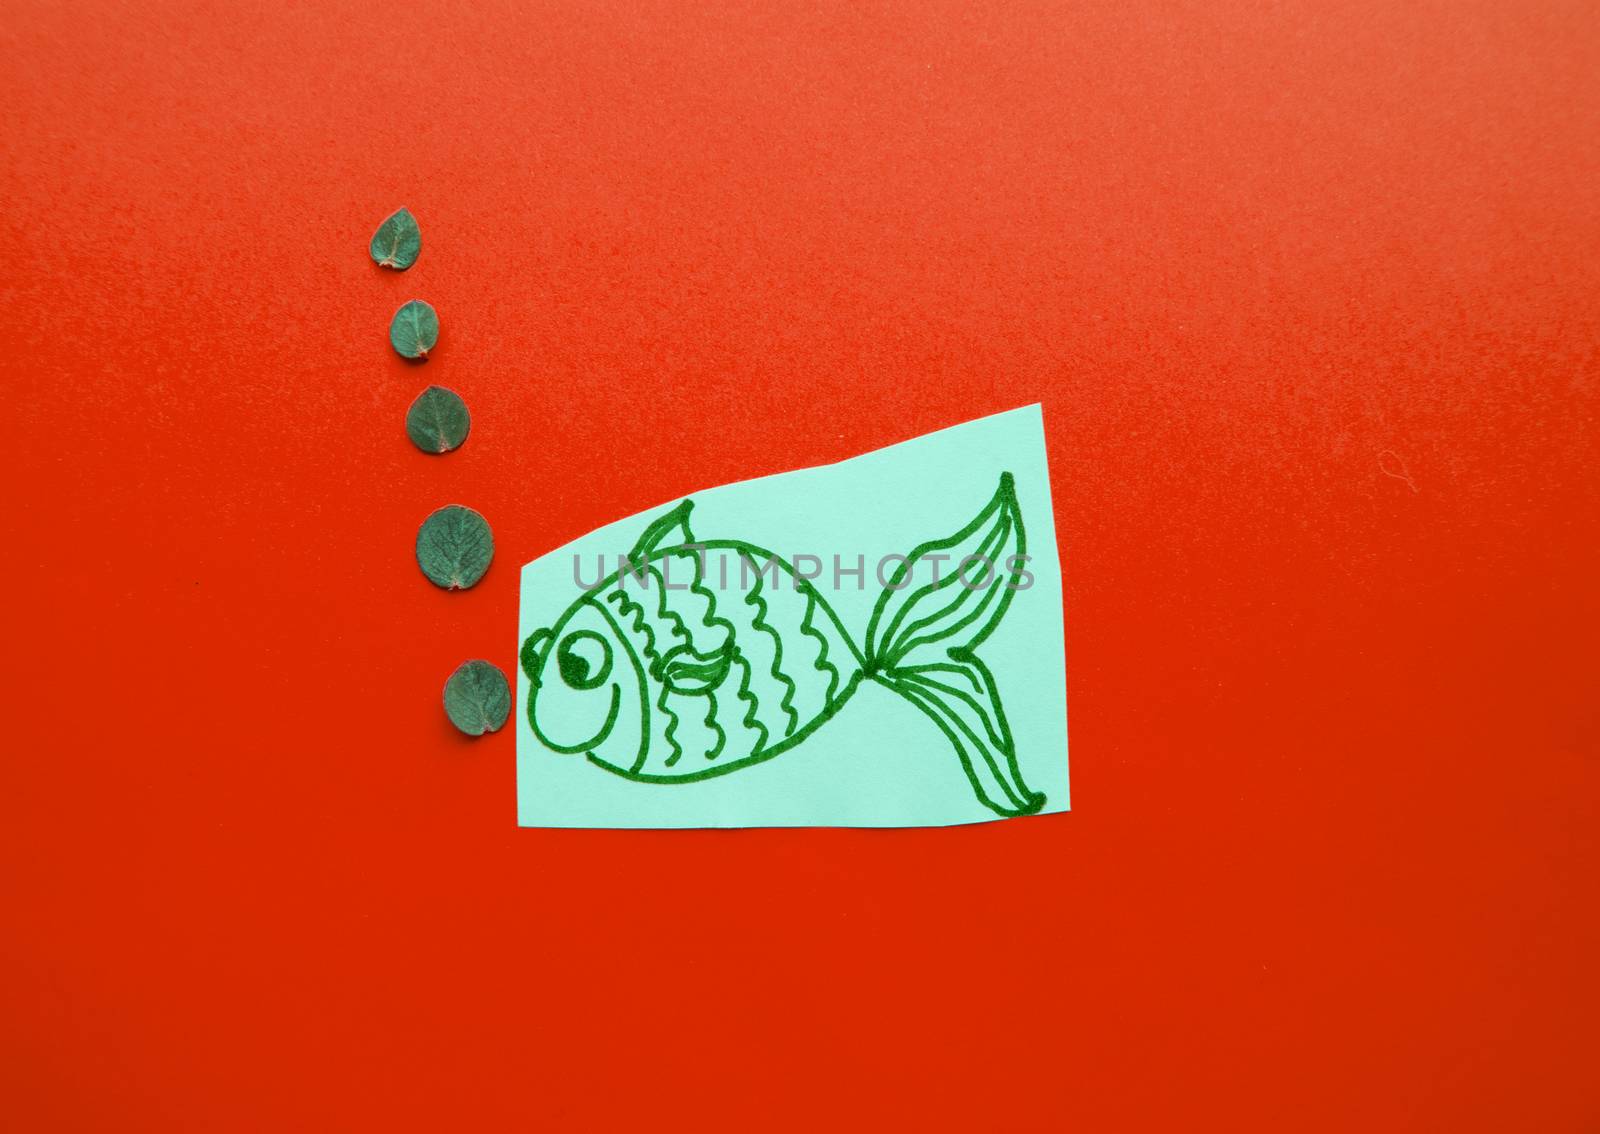 Funny fish with bubbles on red background, fool's Day by claire_lucia